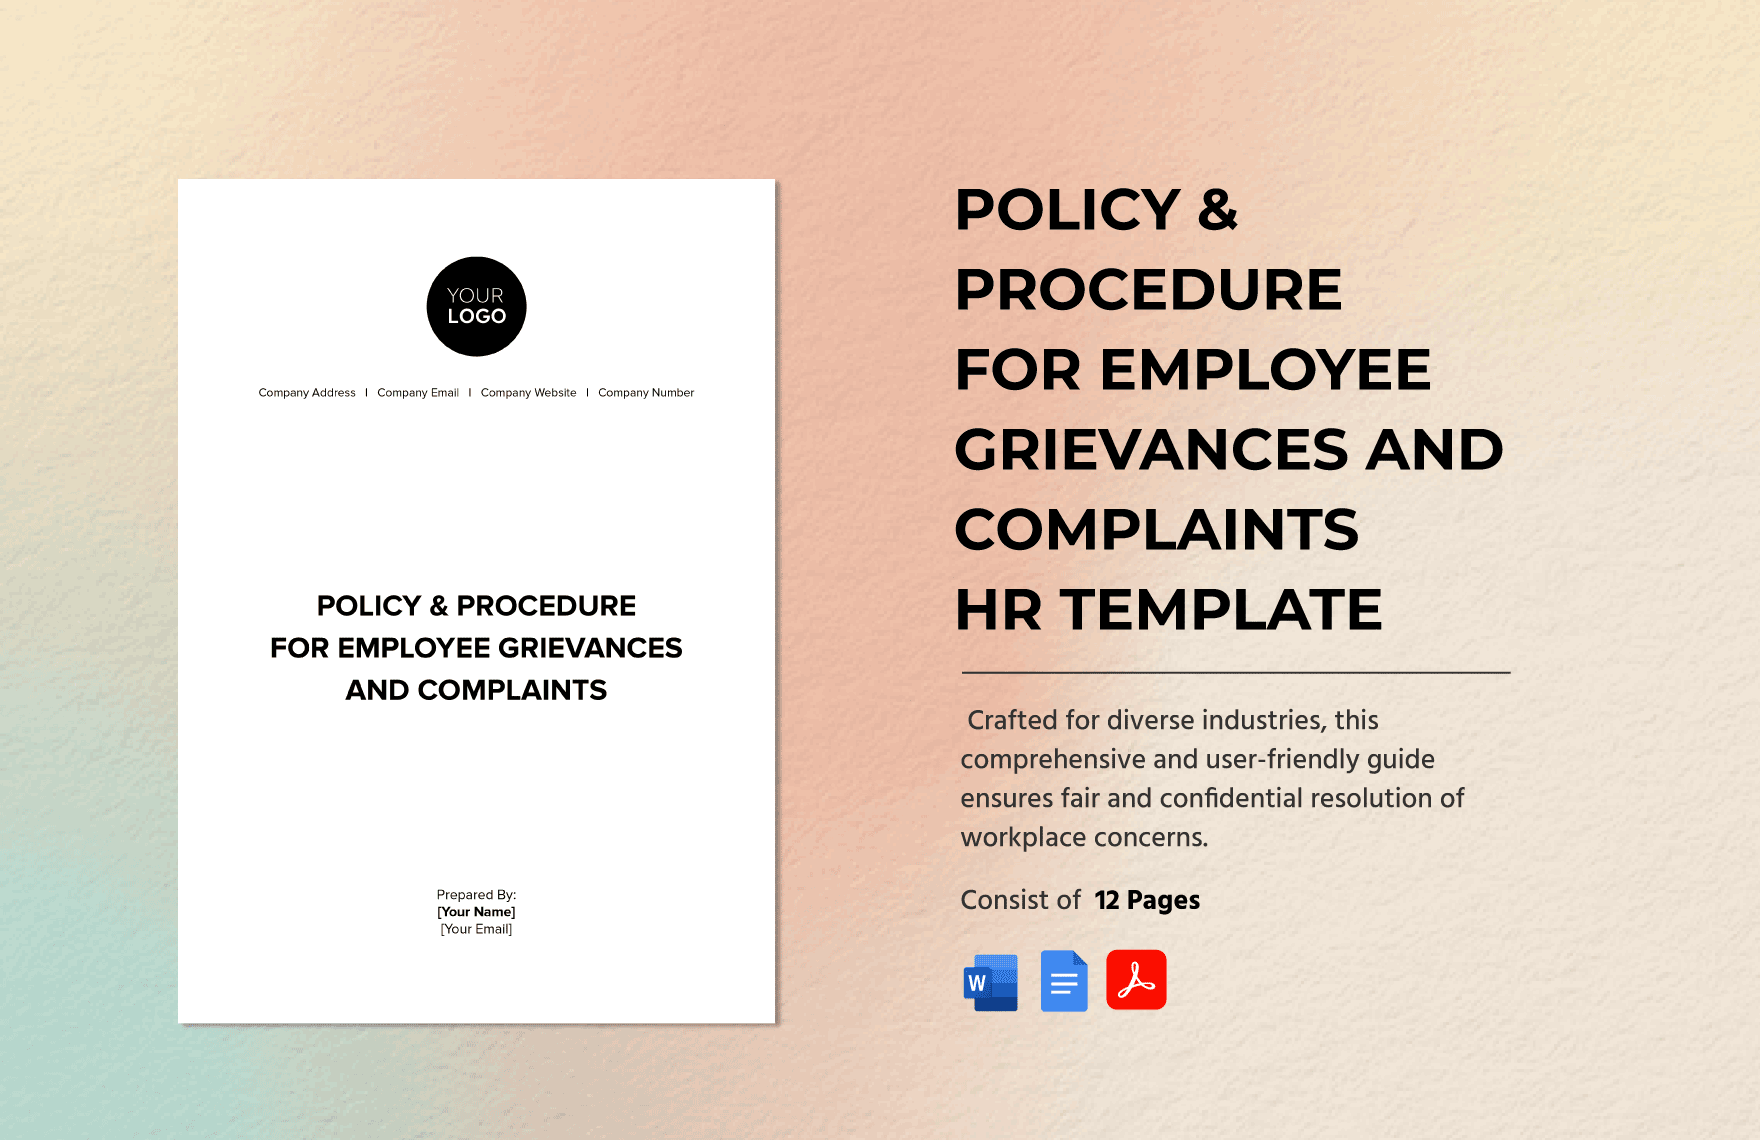 Policy & Procedure for Employee Grievances and Complaints HR Template